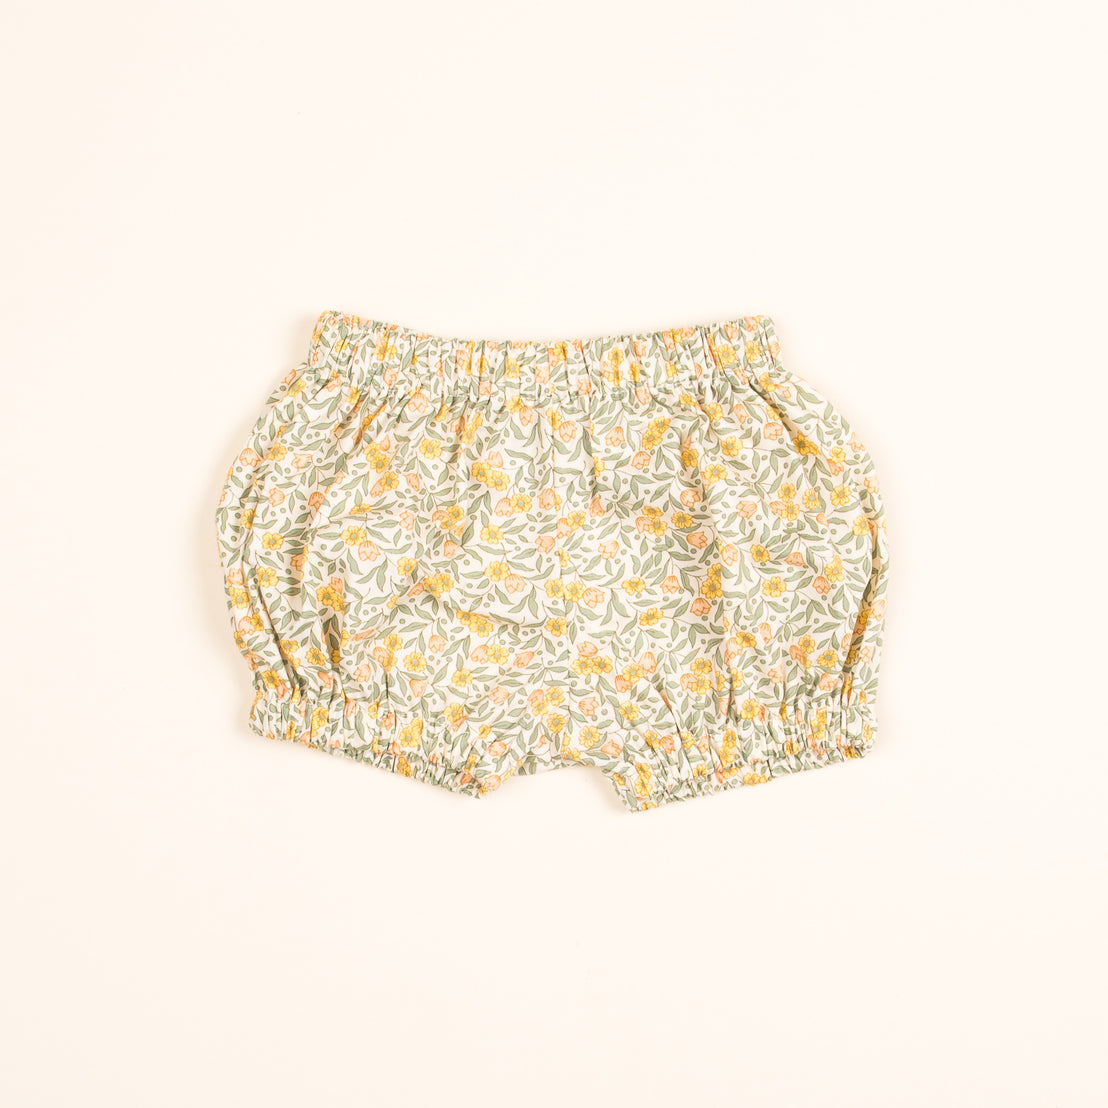 A pair of Petite Fleur Bloomers on a light beige background, featuring a mix of yellow, green, and orange colors with an elastic waistband.